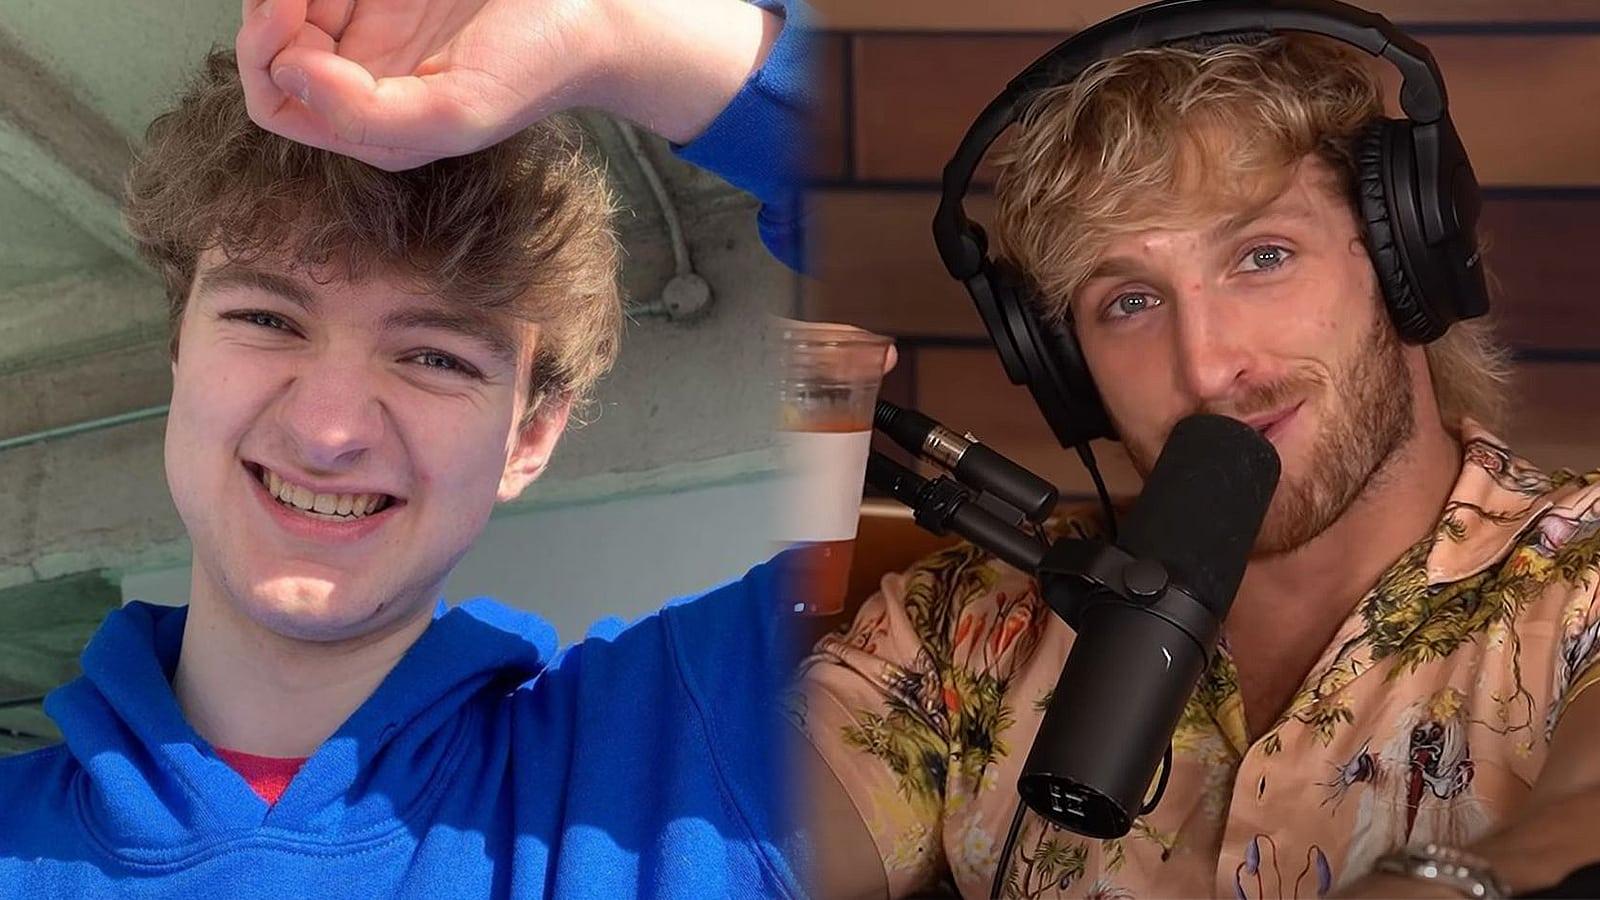 TommyInnit hangs out with Logan Paul